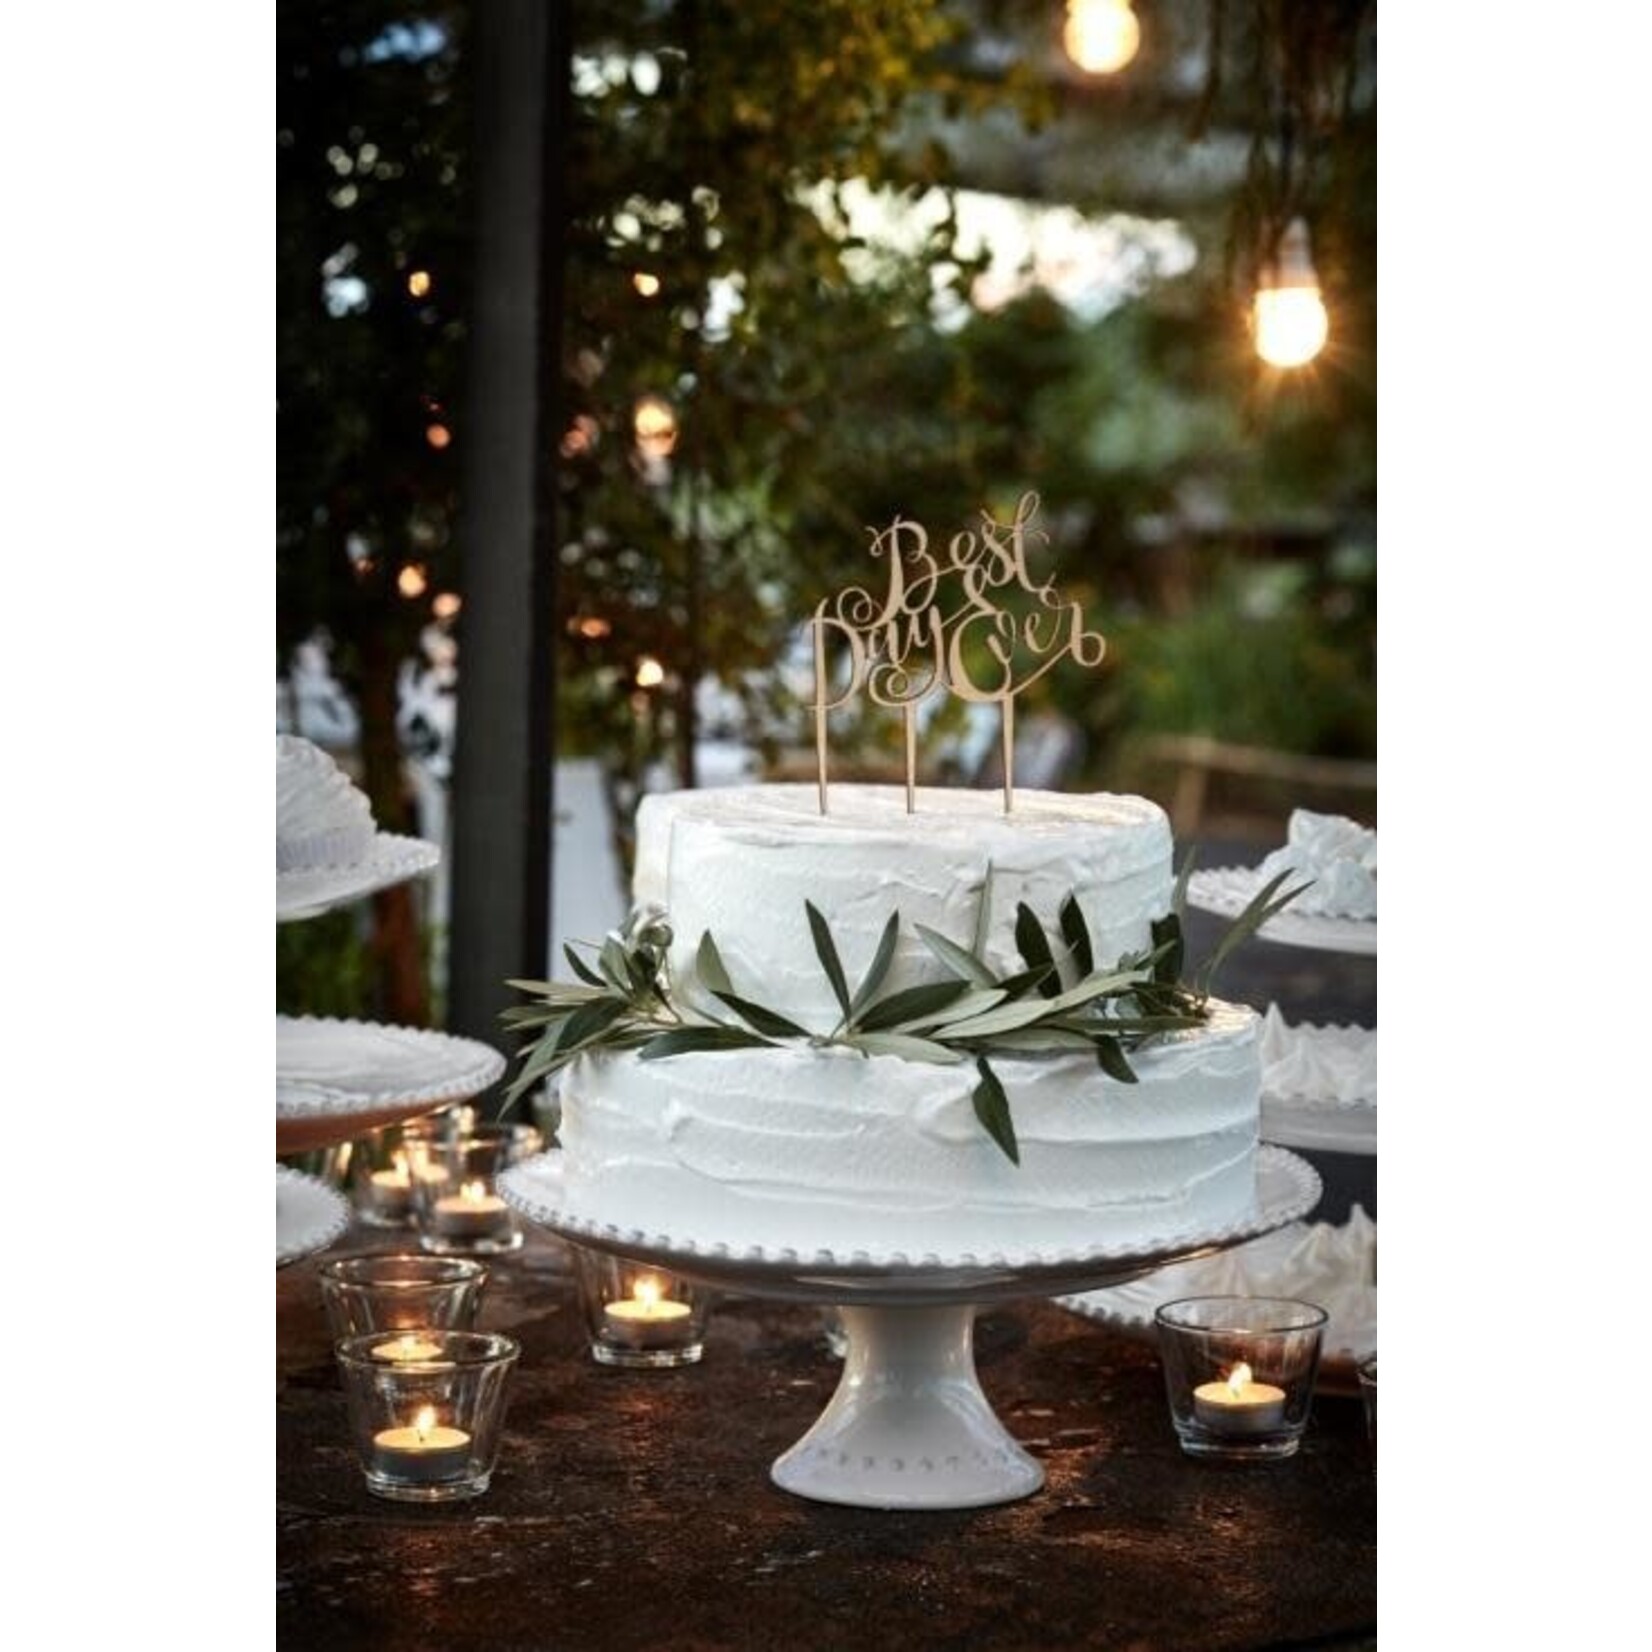 CASAFINA LIVING PEARL CAKE STAND 13"-WHITE